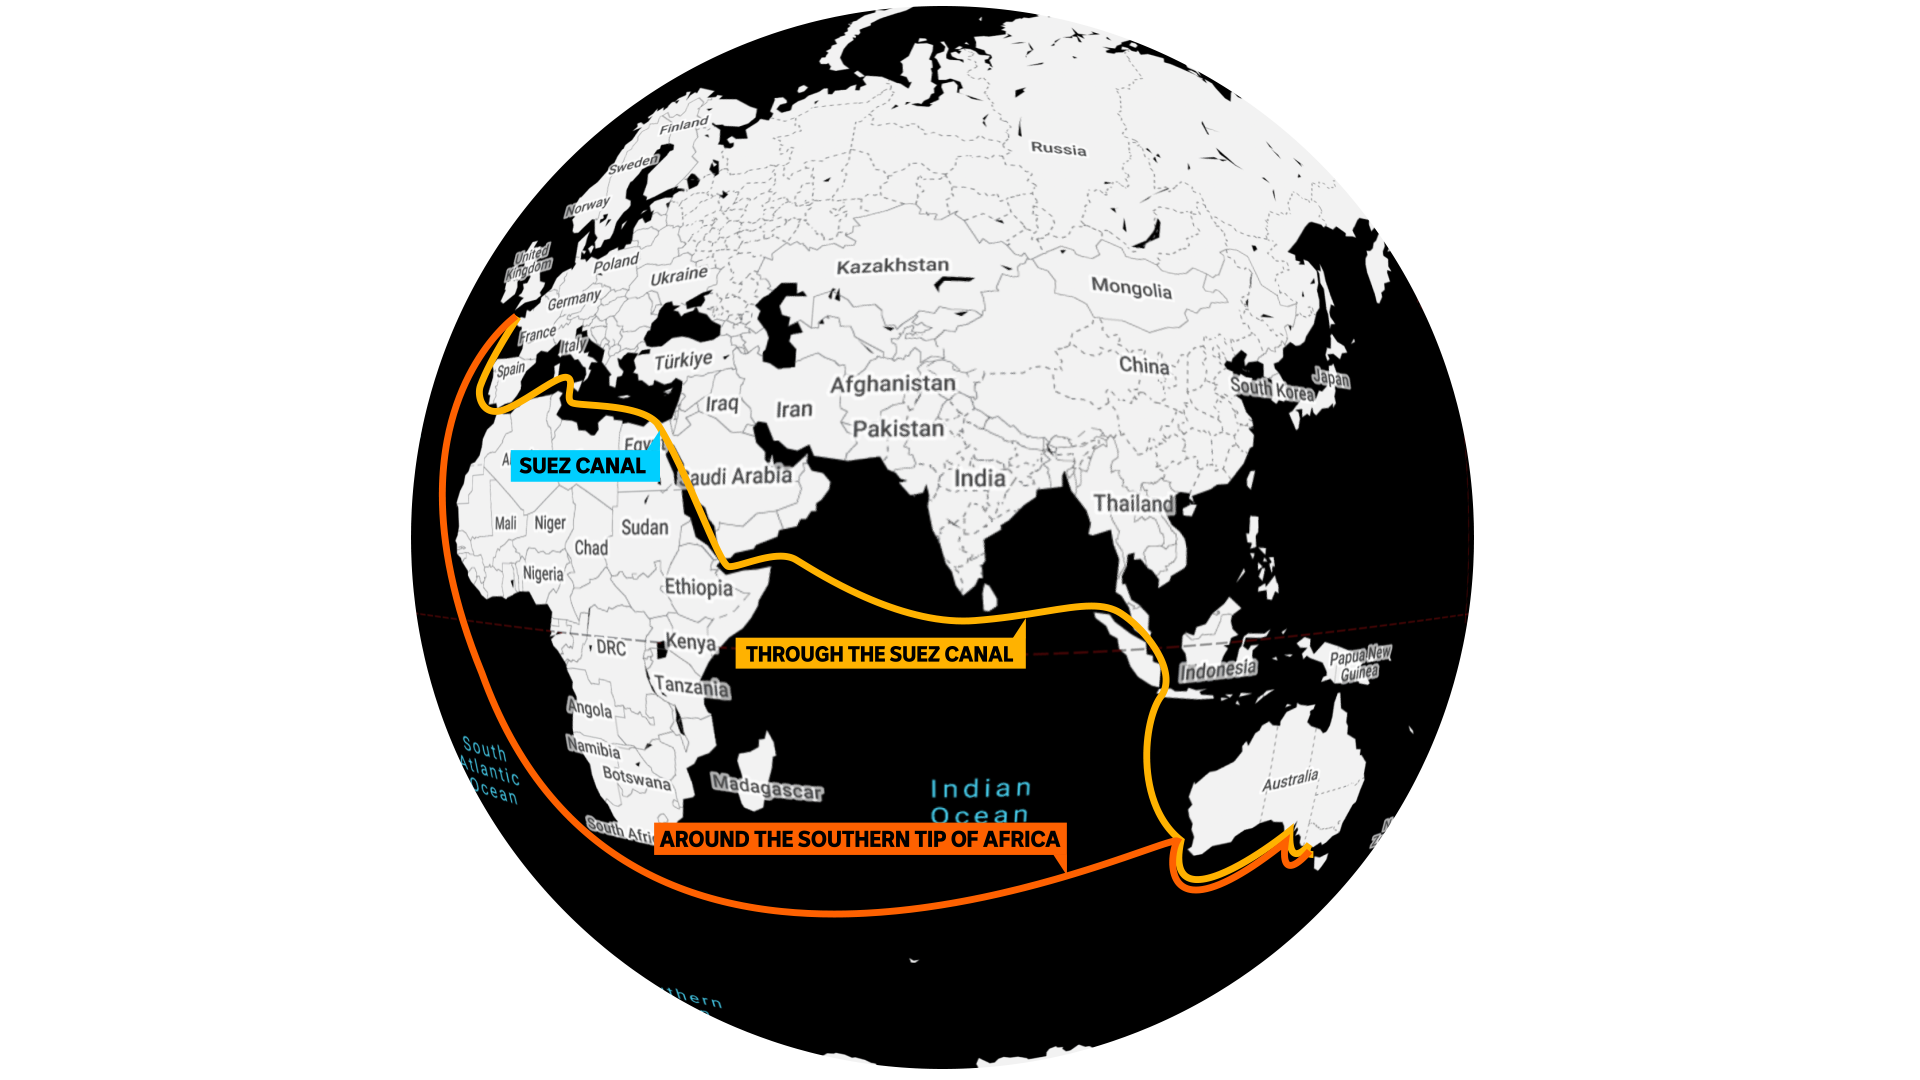 A world map showing the shipping routes from Europe to Australia via the Suez Canal and via the Cape of Good Hope